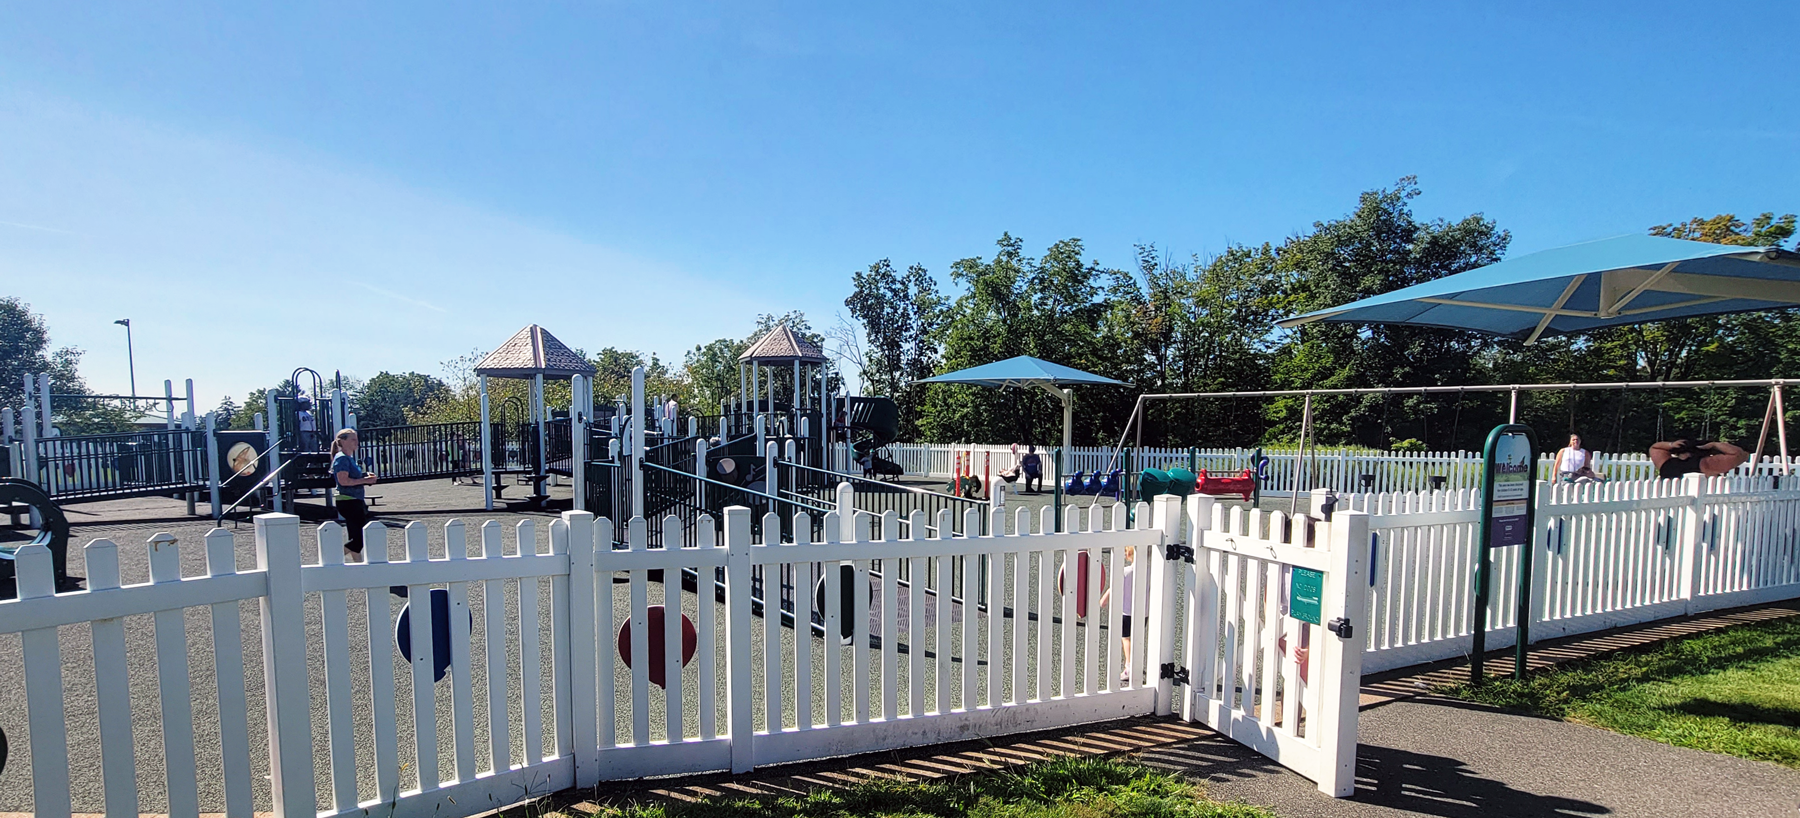 Central Park Playground of Morris County (Jets Play 60 All Access Playground)